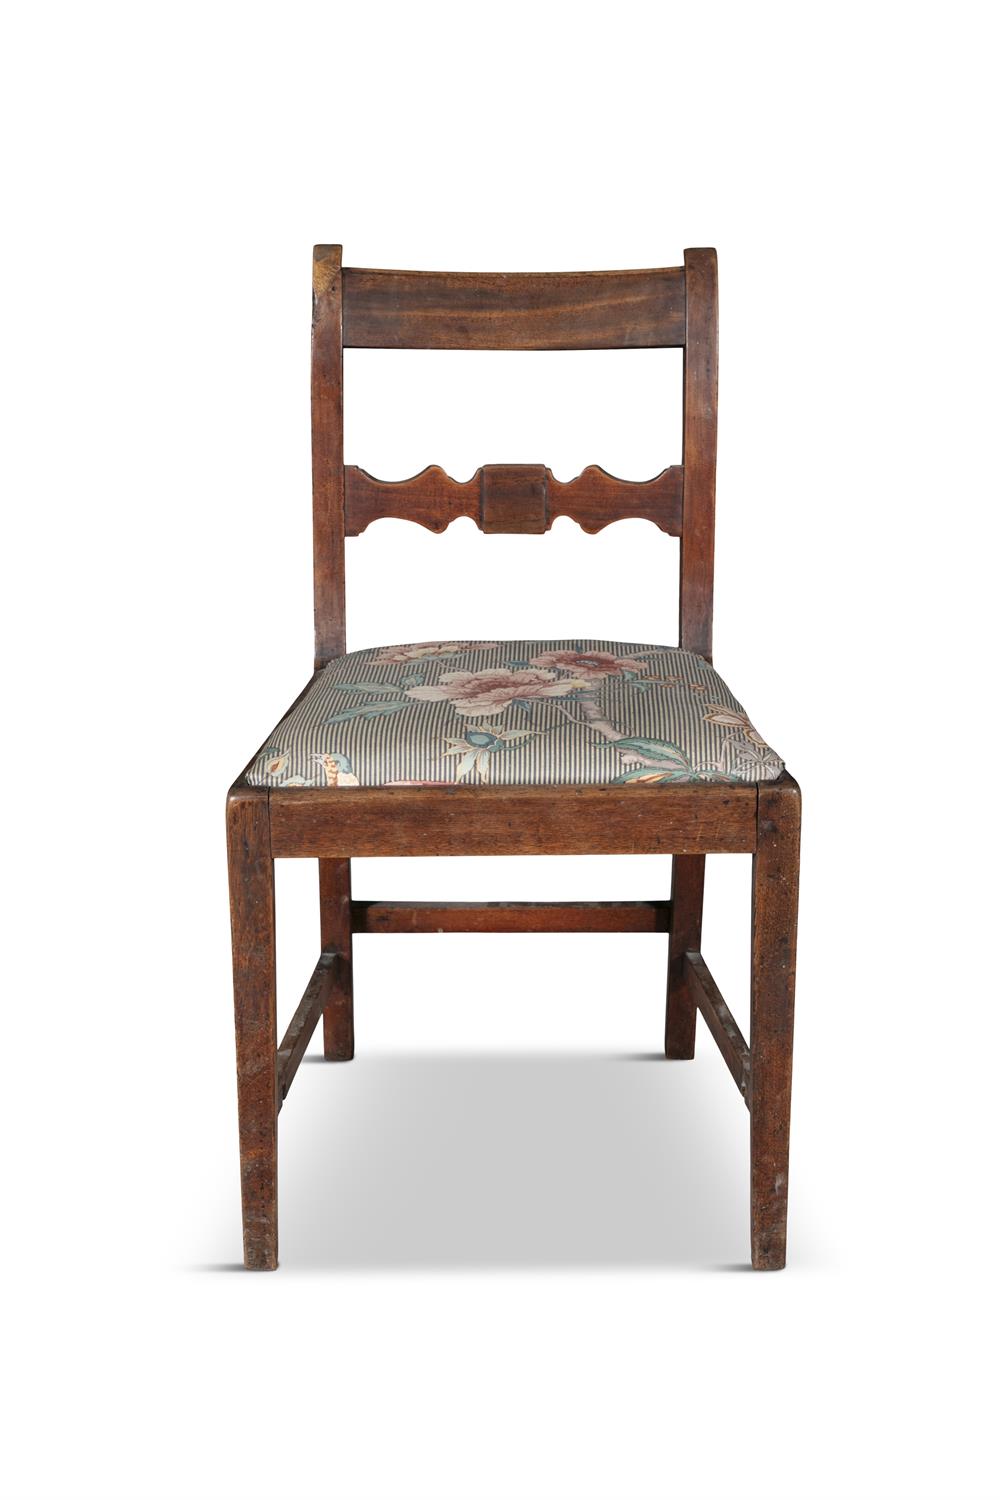 A SET OF SIX MAHOGANY DINING CHAIRS, EARLY 19TH CENTURY, each with the slightly scrolled back - Image 3 of 7